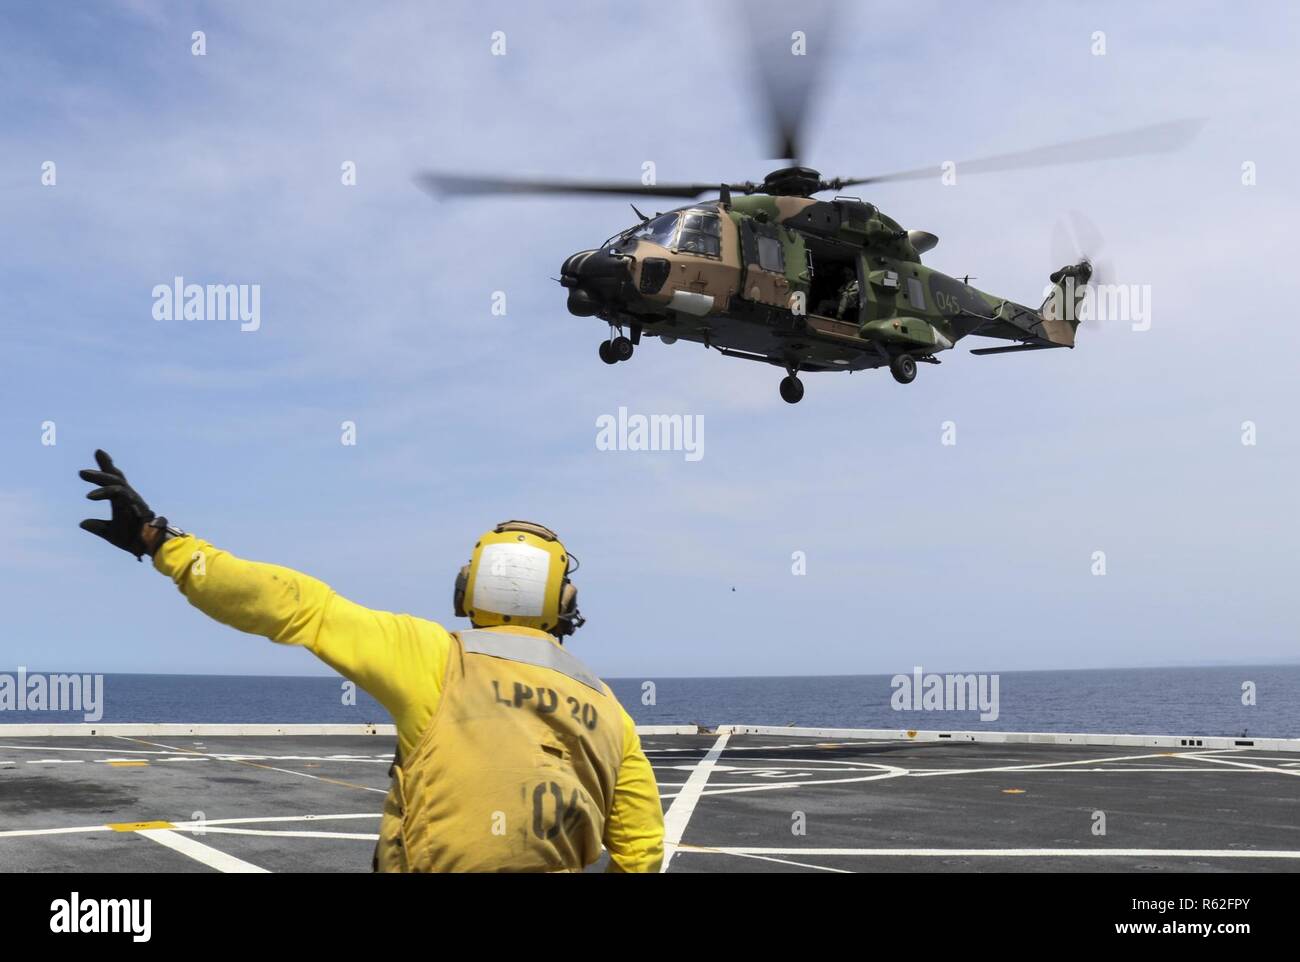 CORAL SEA (Nov. 19, 2018) Aviation Boatswain’s Mate (Handling) 3rd Class Dion Sanders, from New York, signals a MRH-90 Taipan helicopter, assigned to the Royal Australian Navy helicopter landing dock ship HMAS Adelaide (L01), as it takes off from the flight deck of the amphibious transport dock ship USS Green Bay (LPD 20) during cross deck flight operations. Green Bay, part of Commander Amphibious Squadron 11, is operating in the region to enhance interoperability with partners and serve as a ready-response force for any type of contingency. Stock Photo